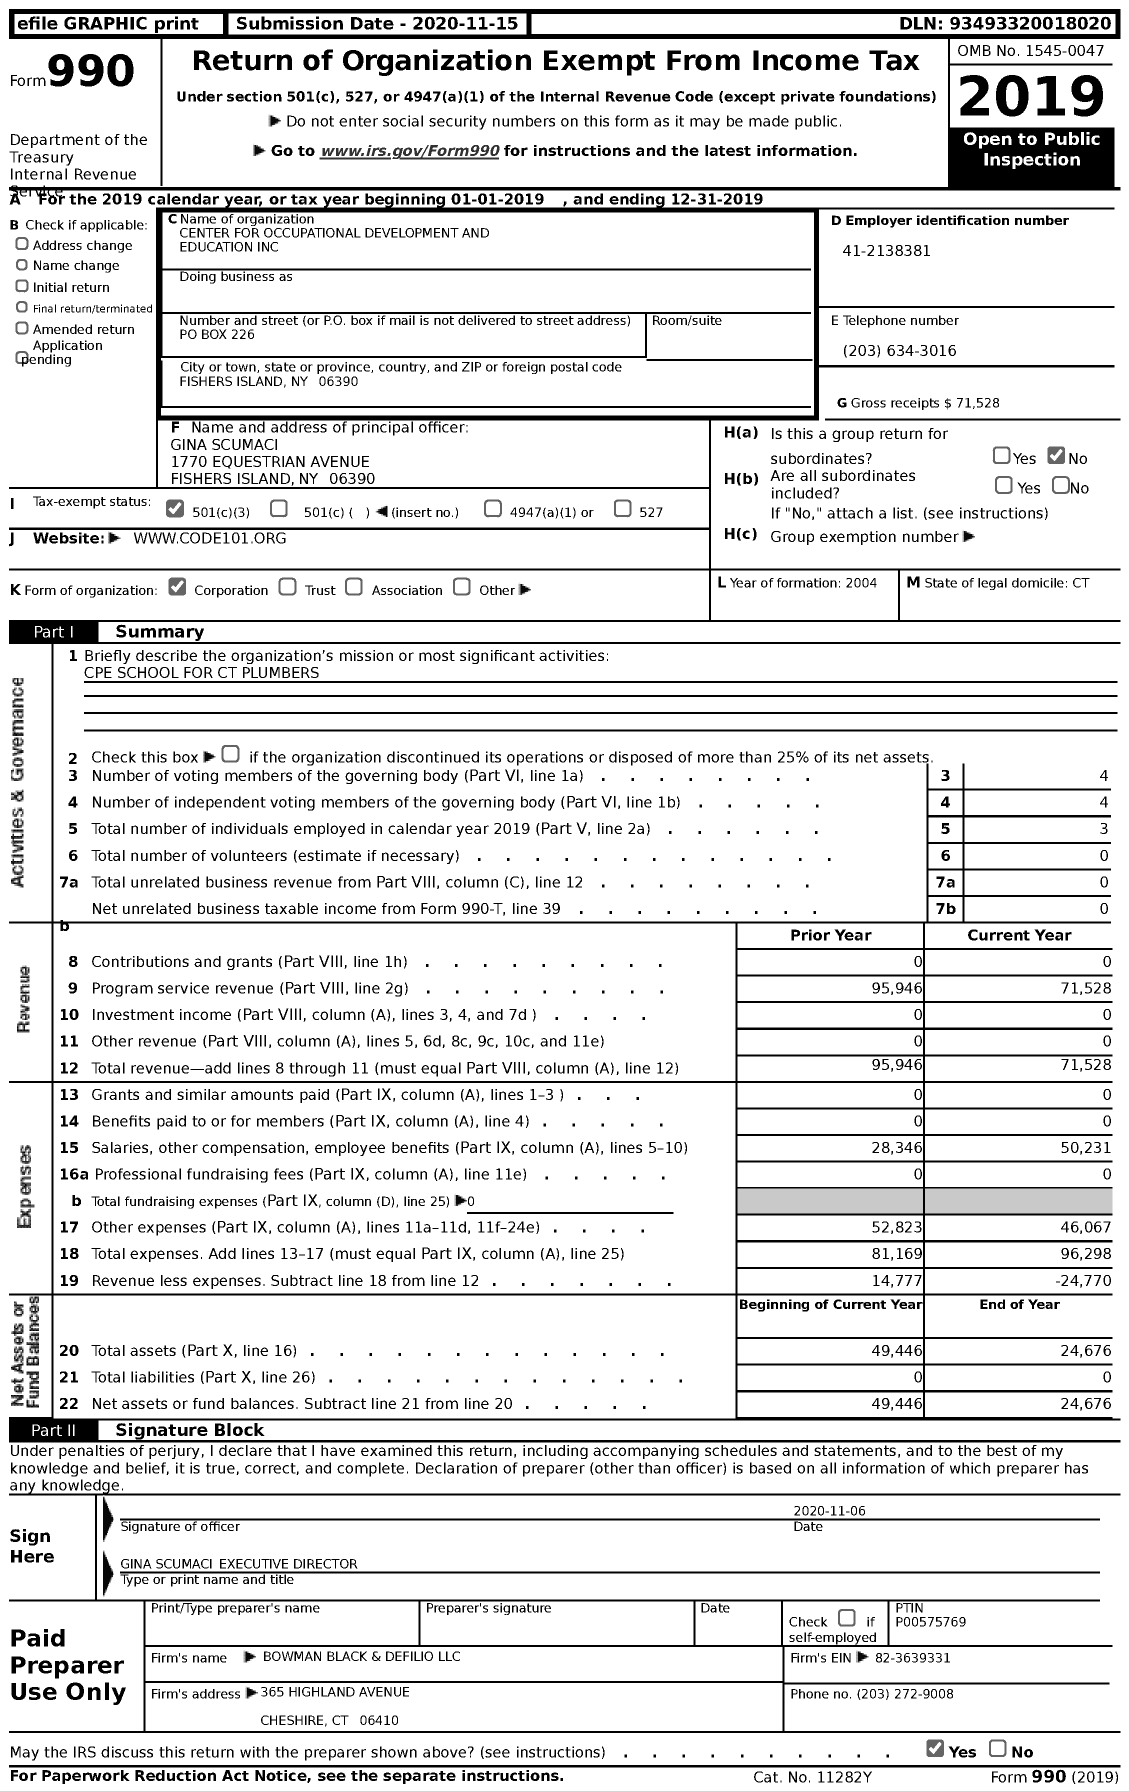 Image of first page of 2019 Form 990 for Center for Occupational Development and Education